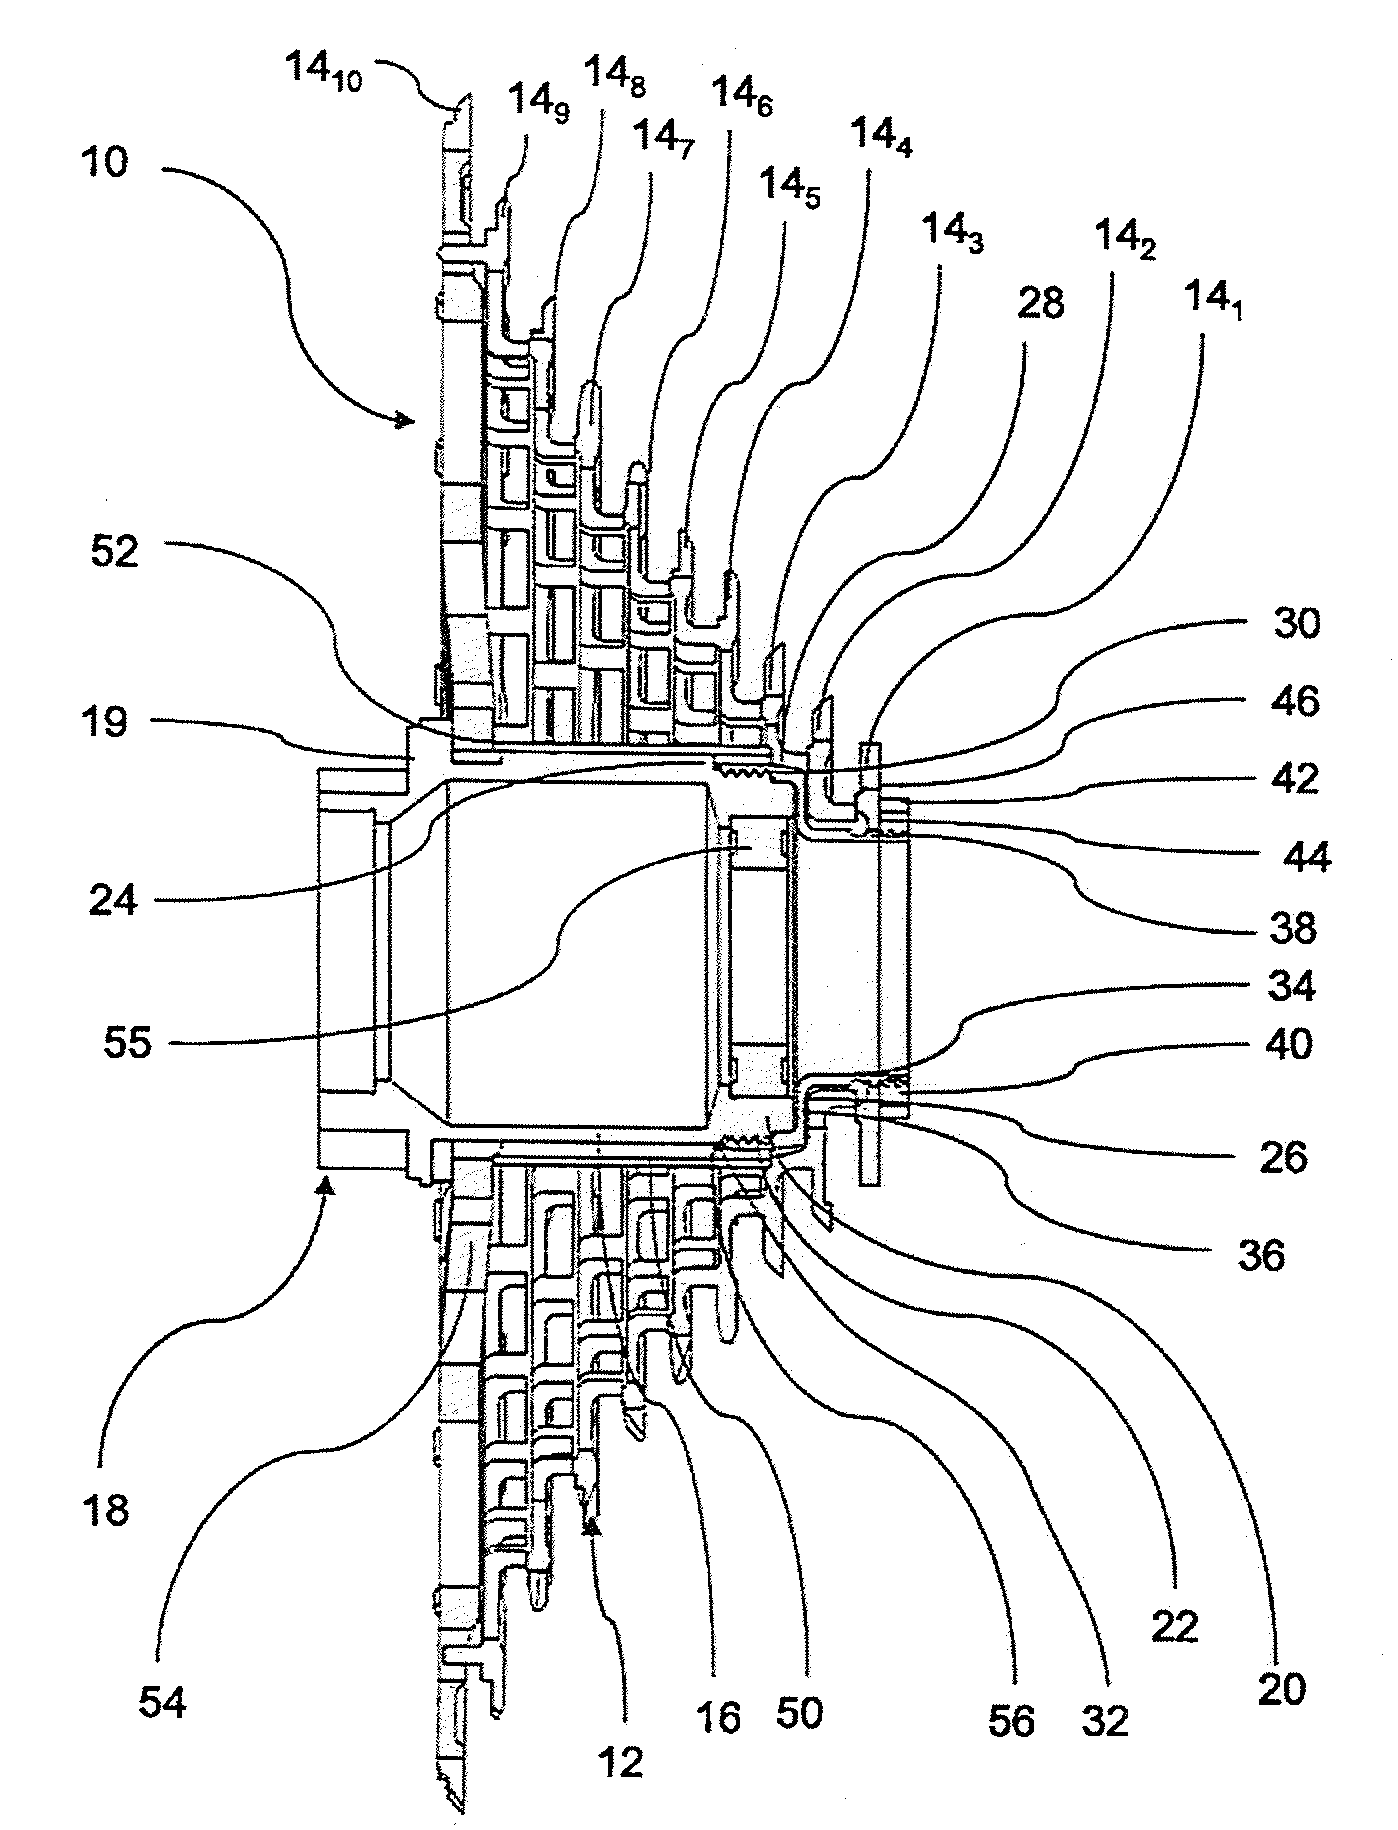 Driver for Mounting a Multiple Sprocket Arrangement to a Bicycle Rear Axle Arrangement